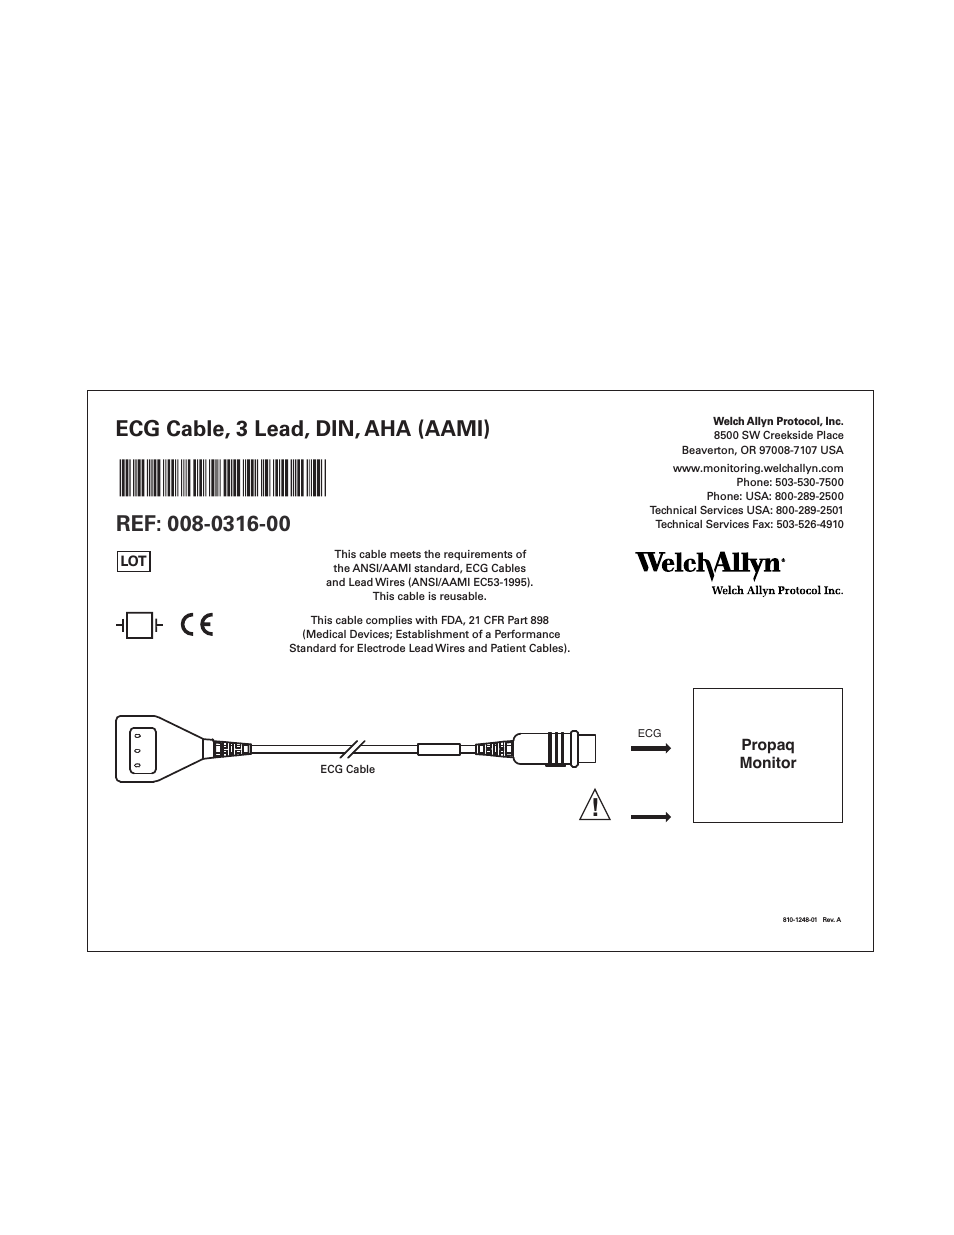 Micropaq Wearable Monitor, ECG Cable, 3 Lead, Din, AHA (AAMI) 008-0316-00 - Quick Reference Guide